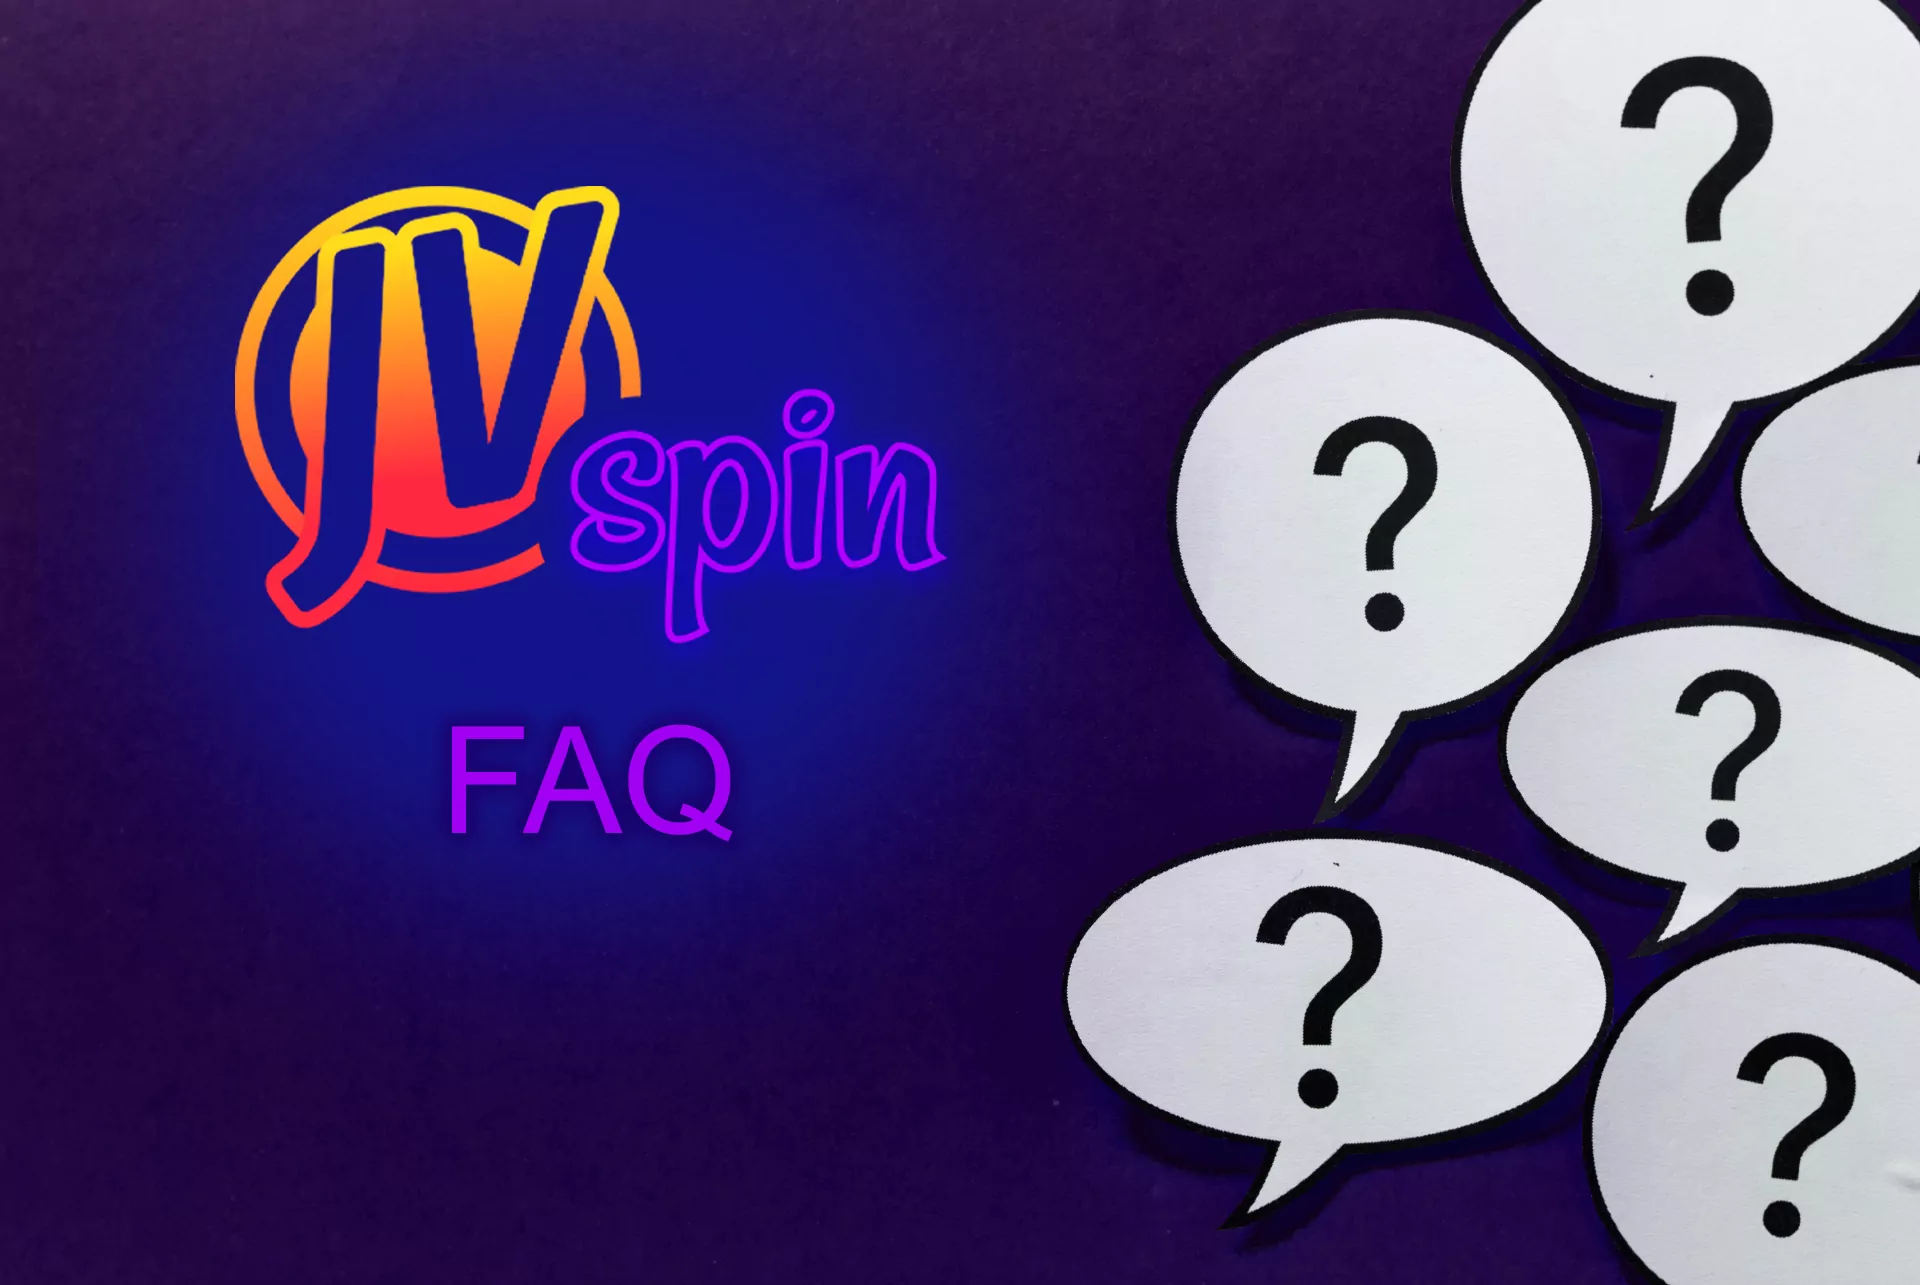 In the section of the FAQ, you can find all the popular questions and answers to them.